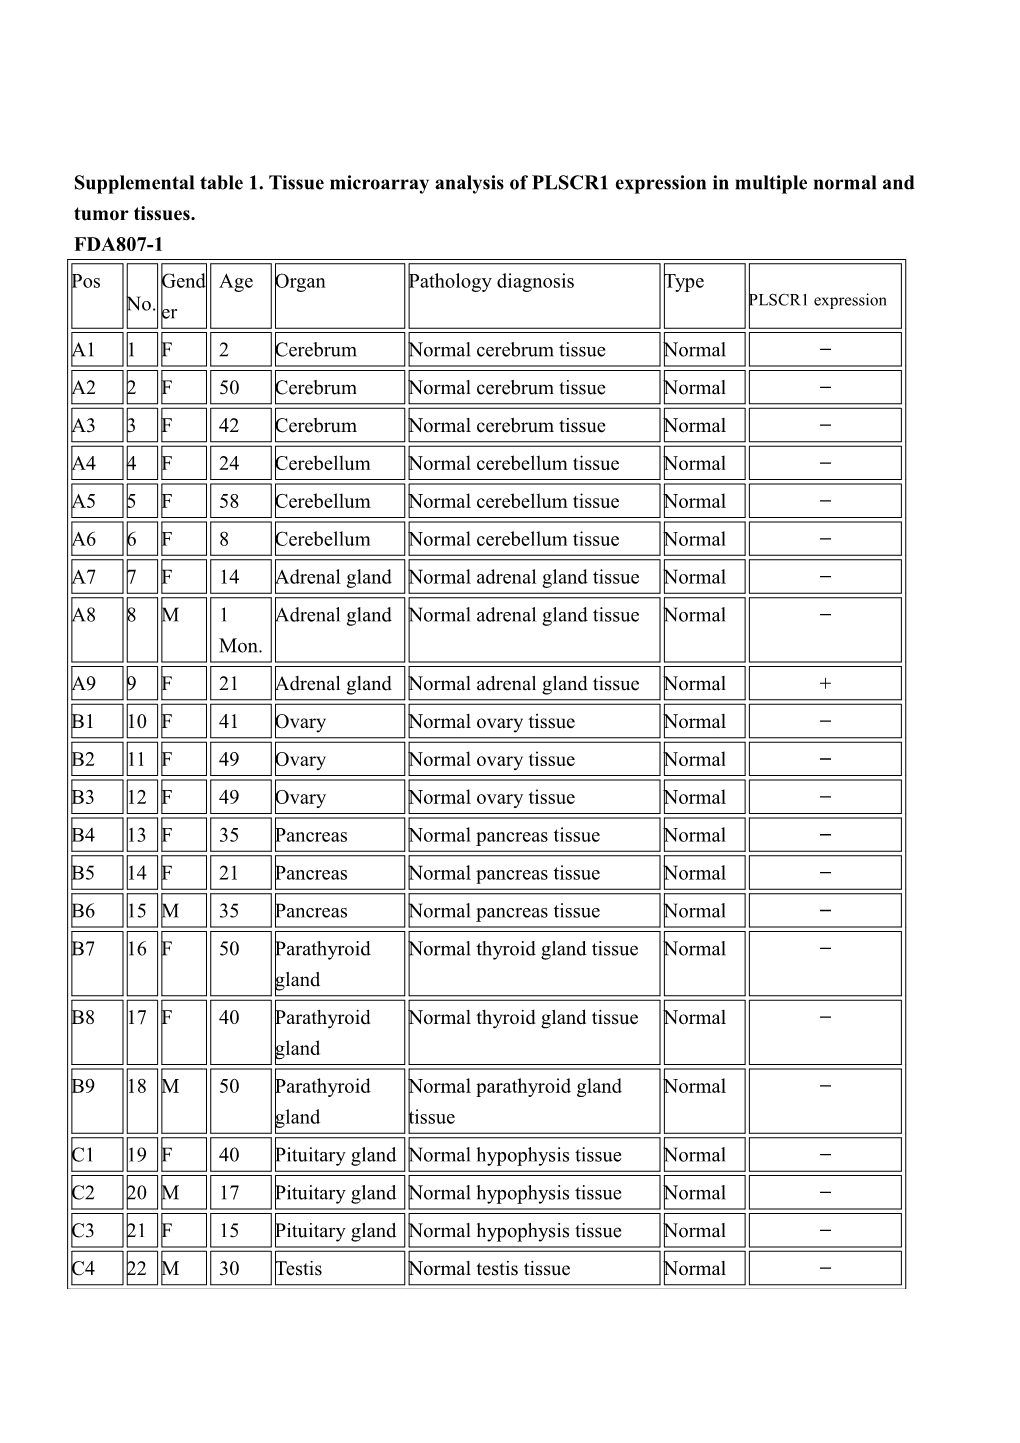 Supplemental Table 1. Tissue Microarray Analysis of PLSCR1 Expression in Multiple Normal